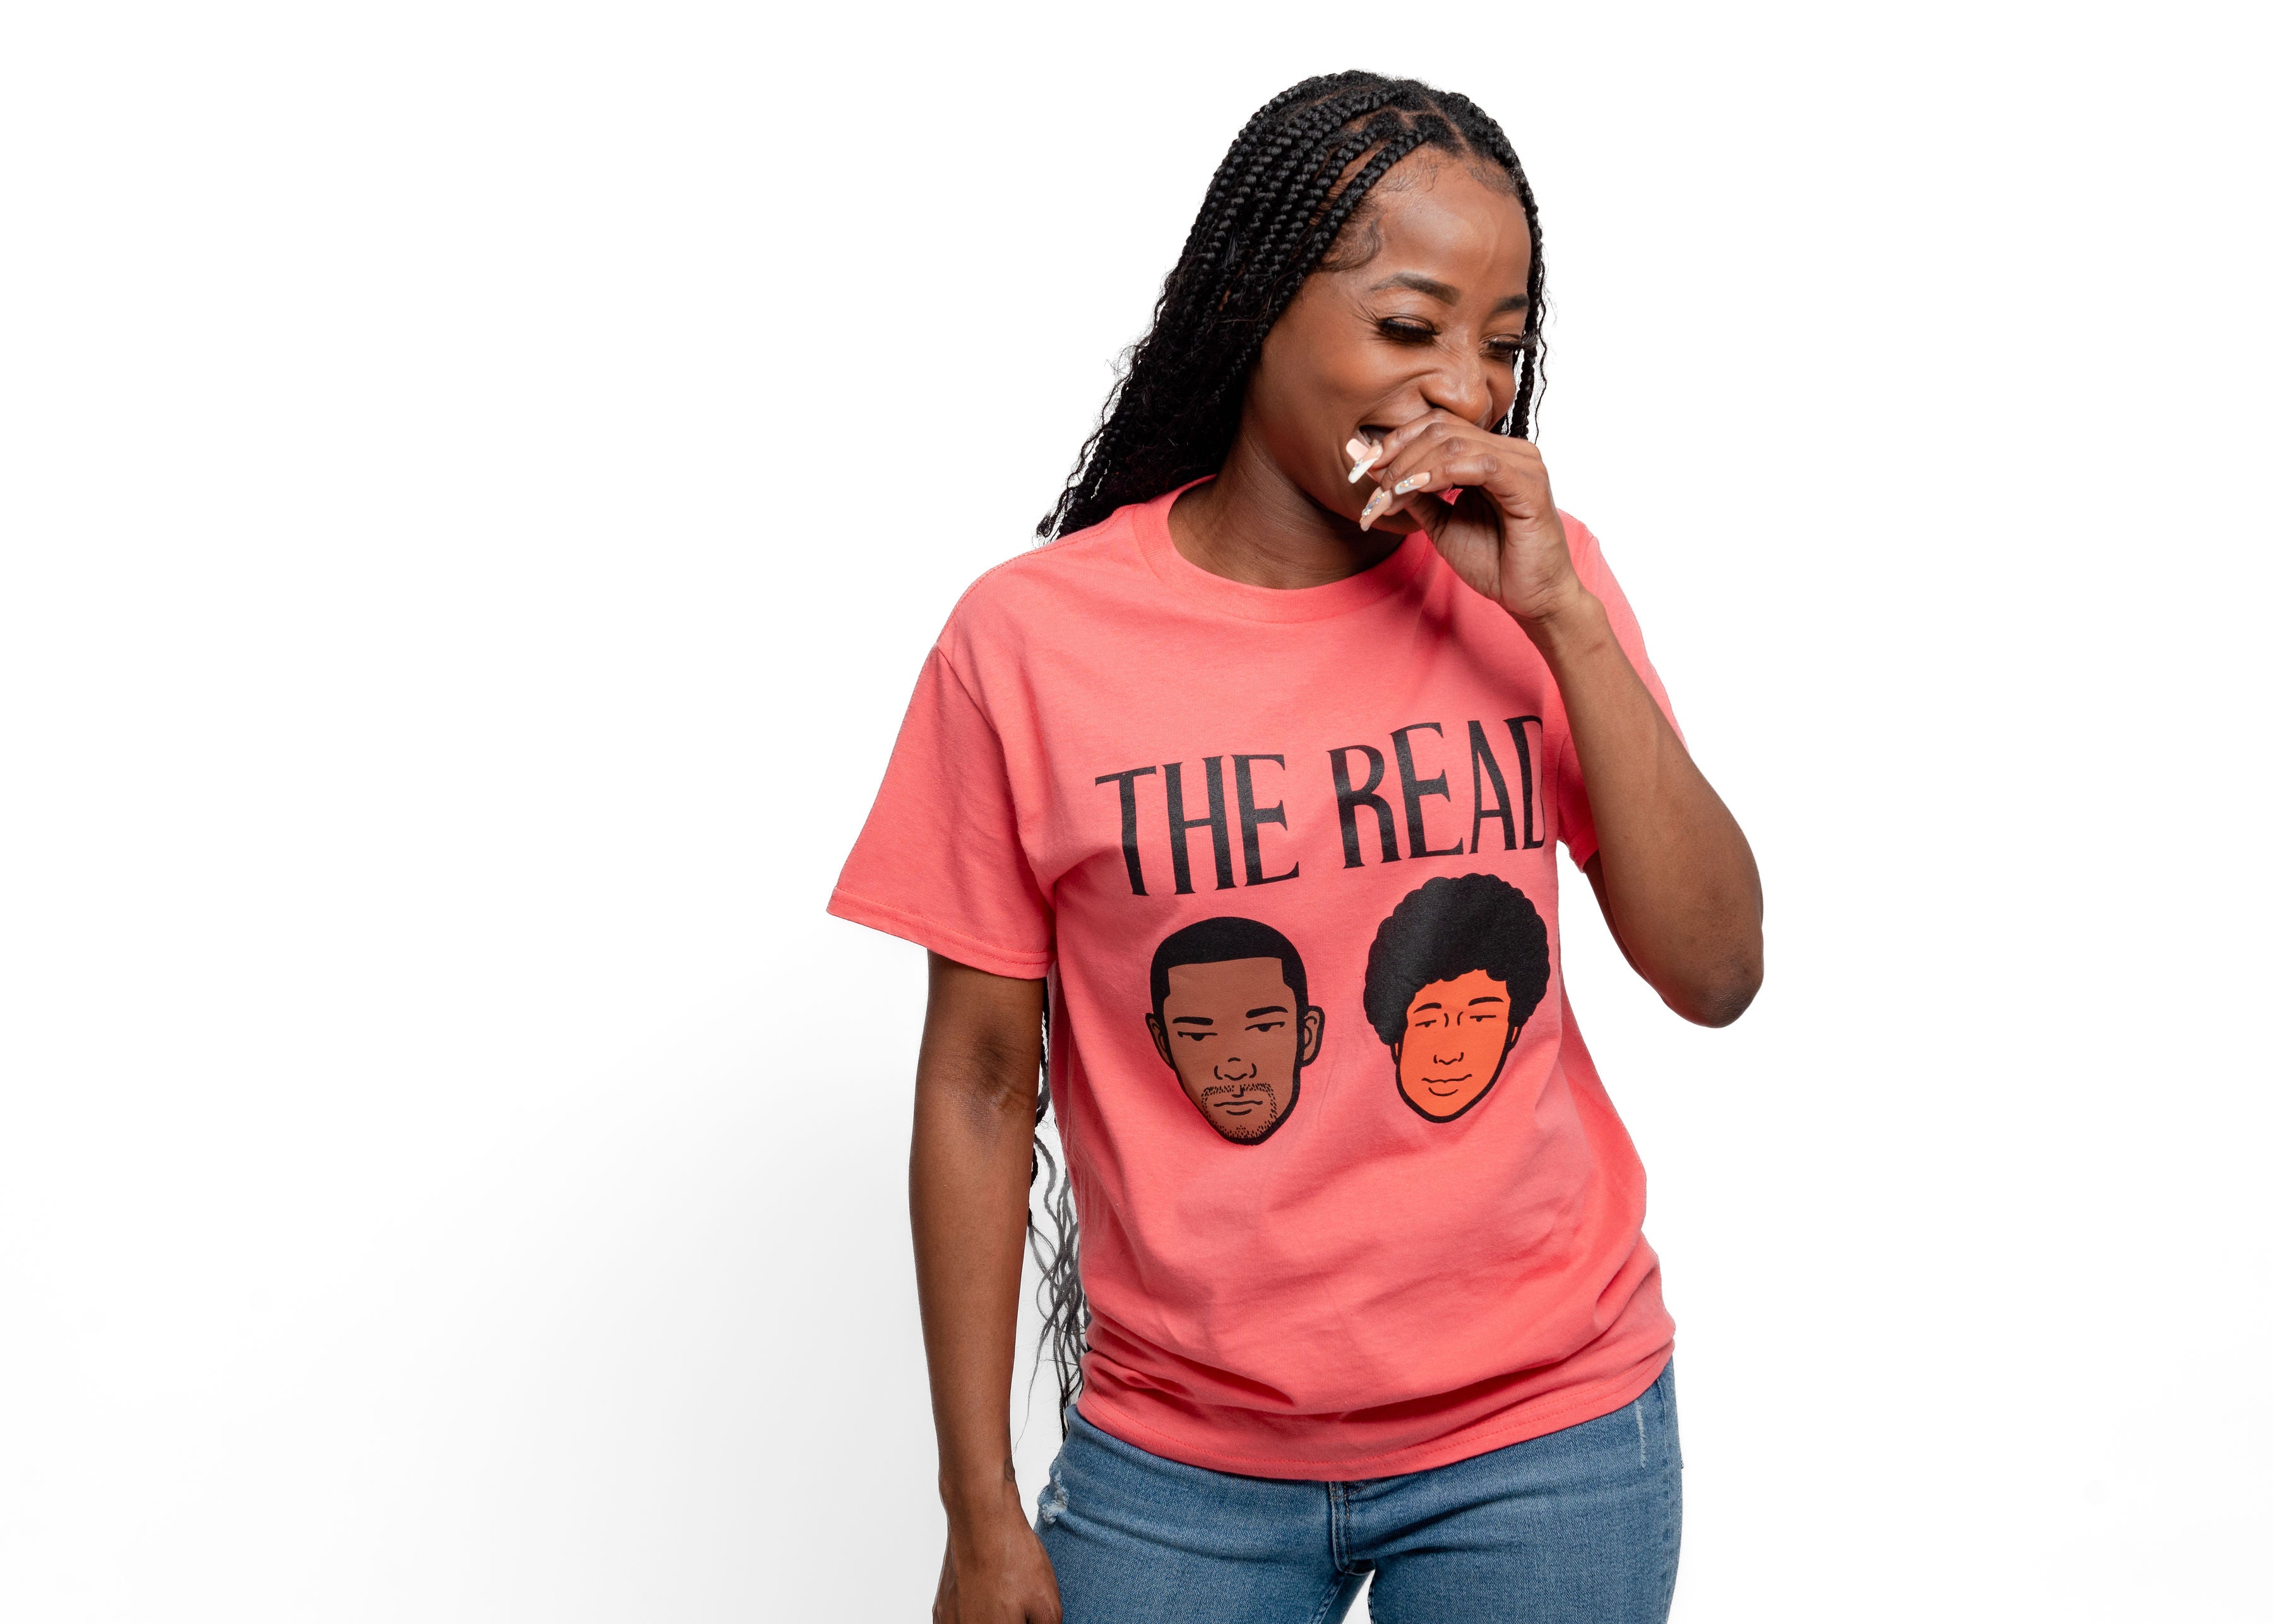 Brb while we sob at how STUNNING y'all look in your RealPod merch